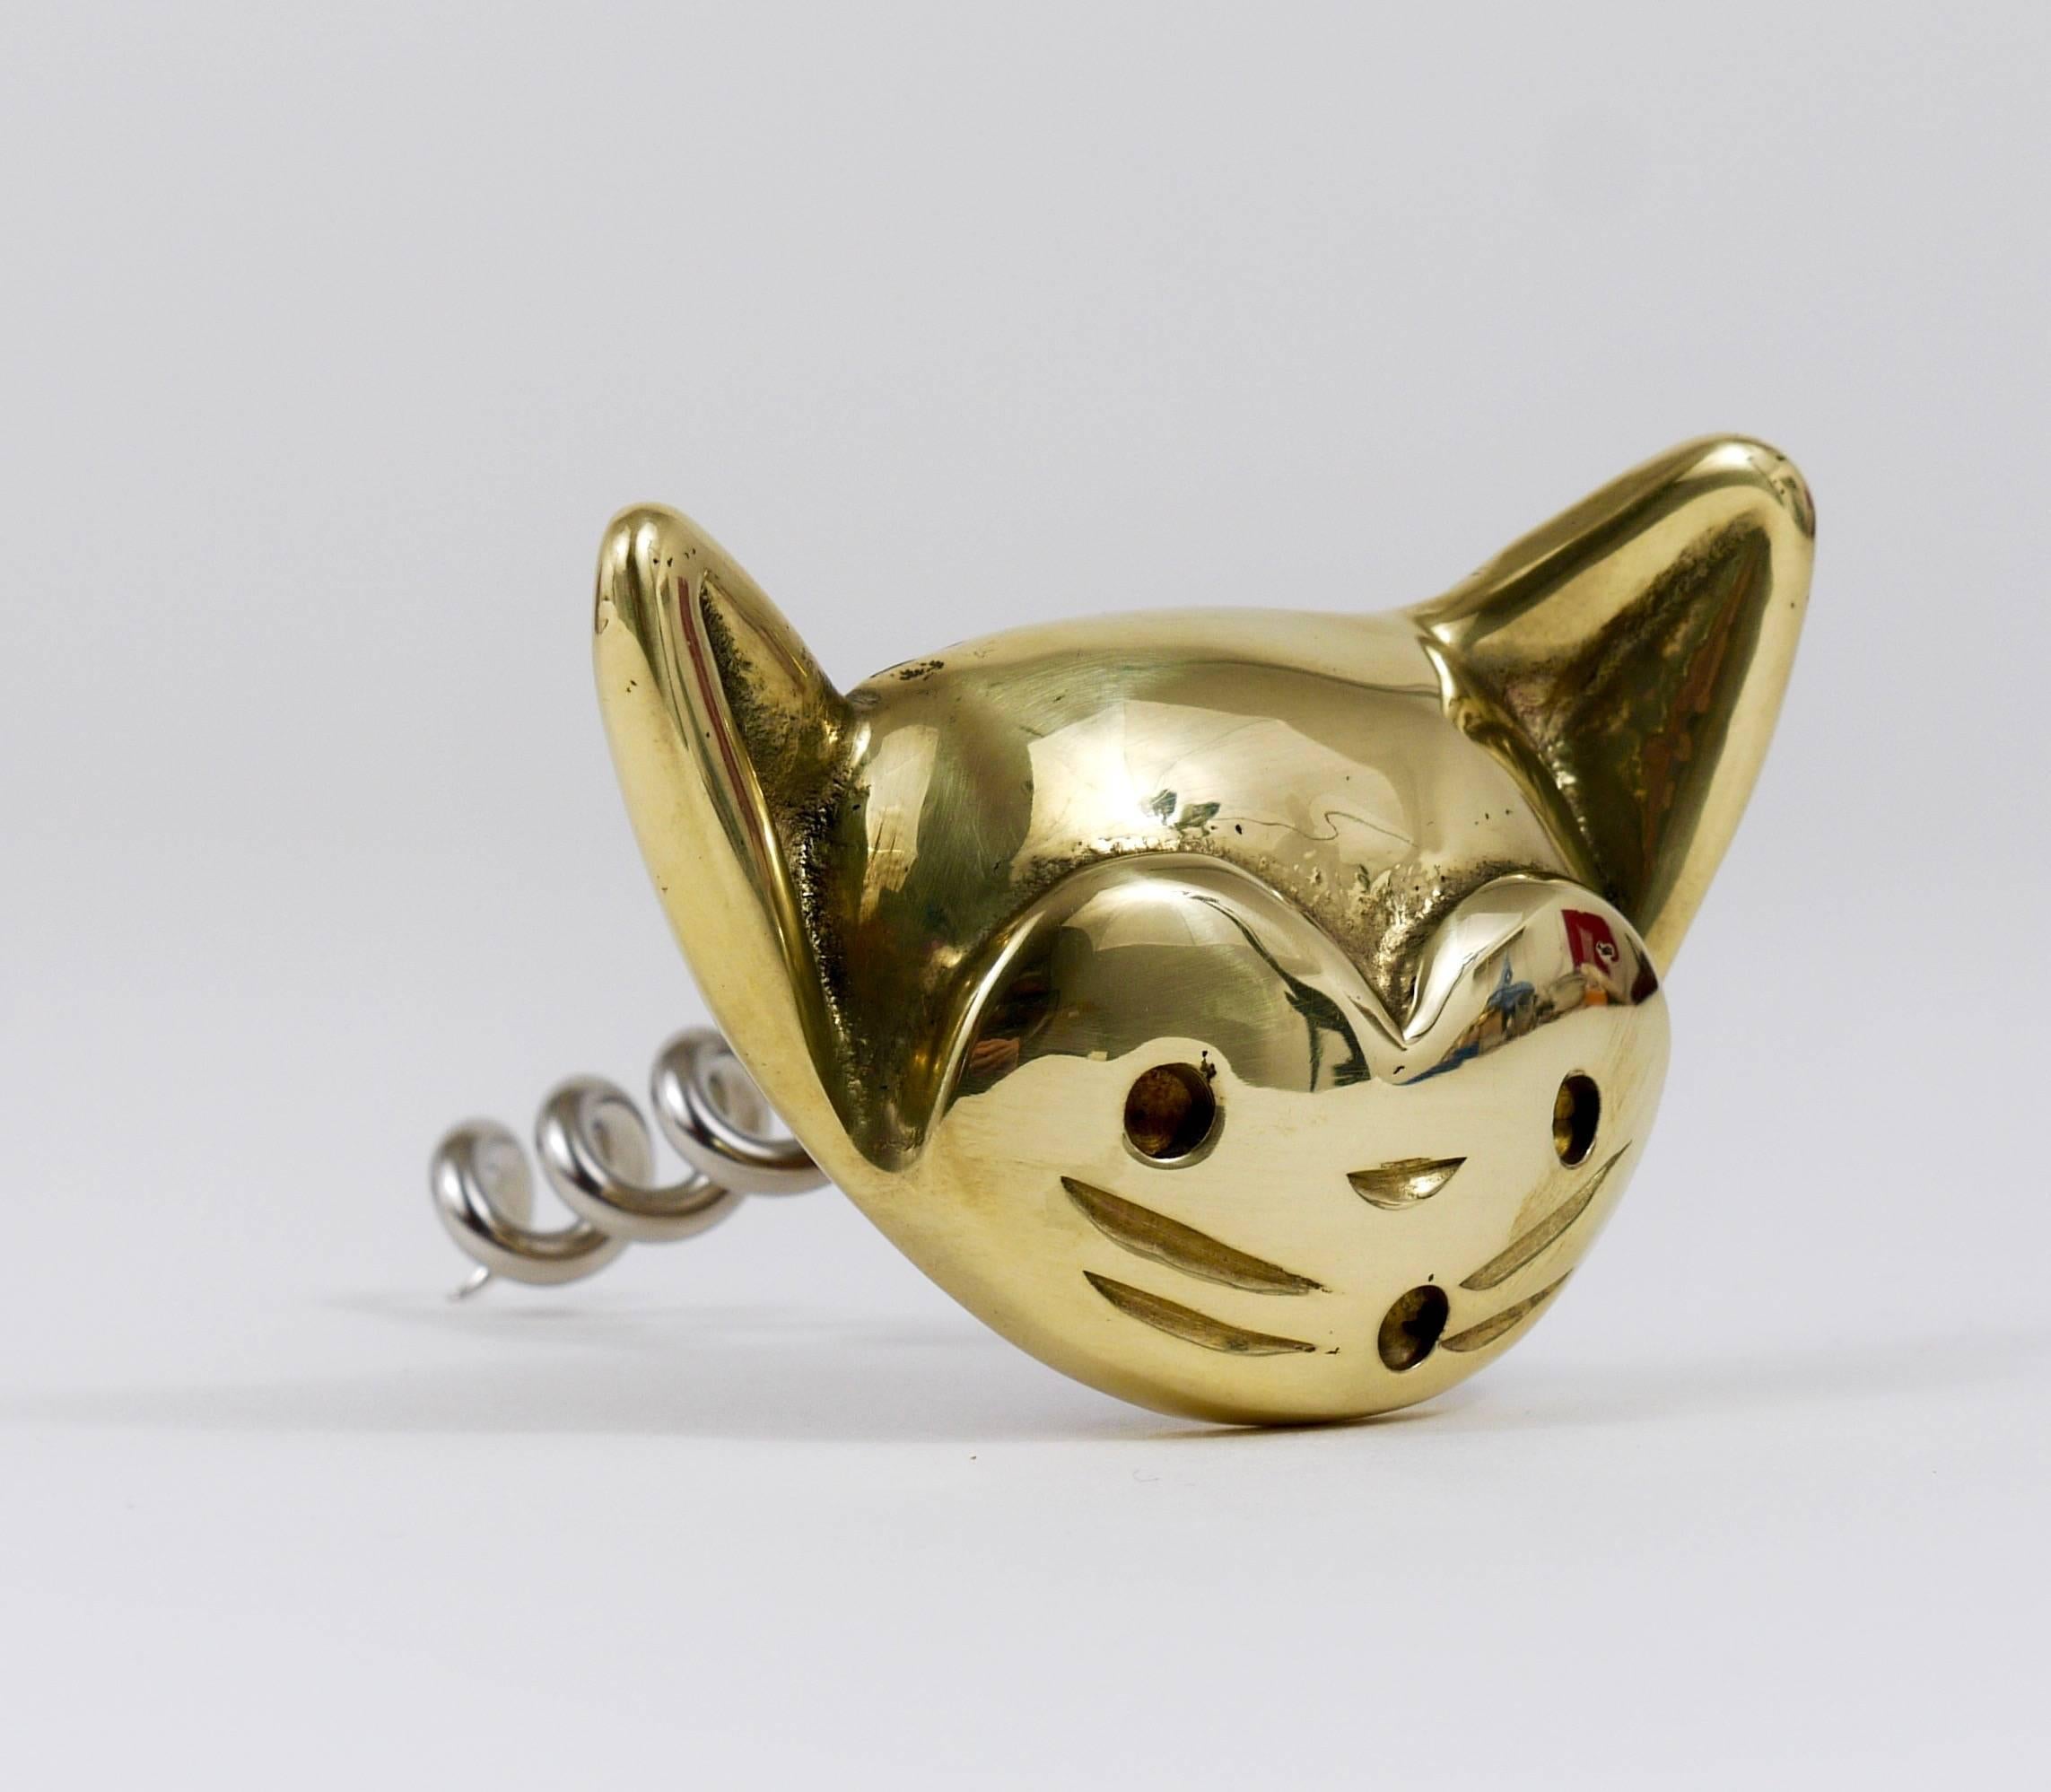 A charming Mid-Century bottle opener / cork screw, displaying a cat. A very humorous design by Walter Bosse, executed by Hertha Baller Austria in the 1950s. Made of polished brass, in very good condition.

 